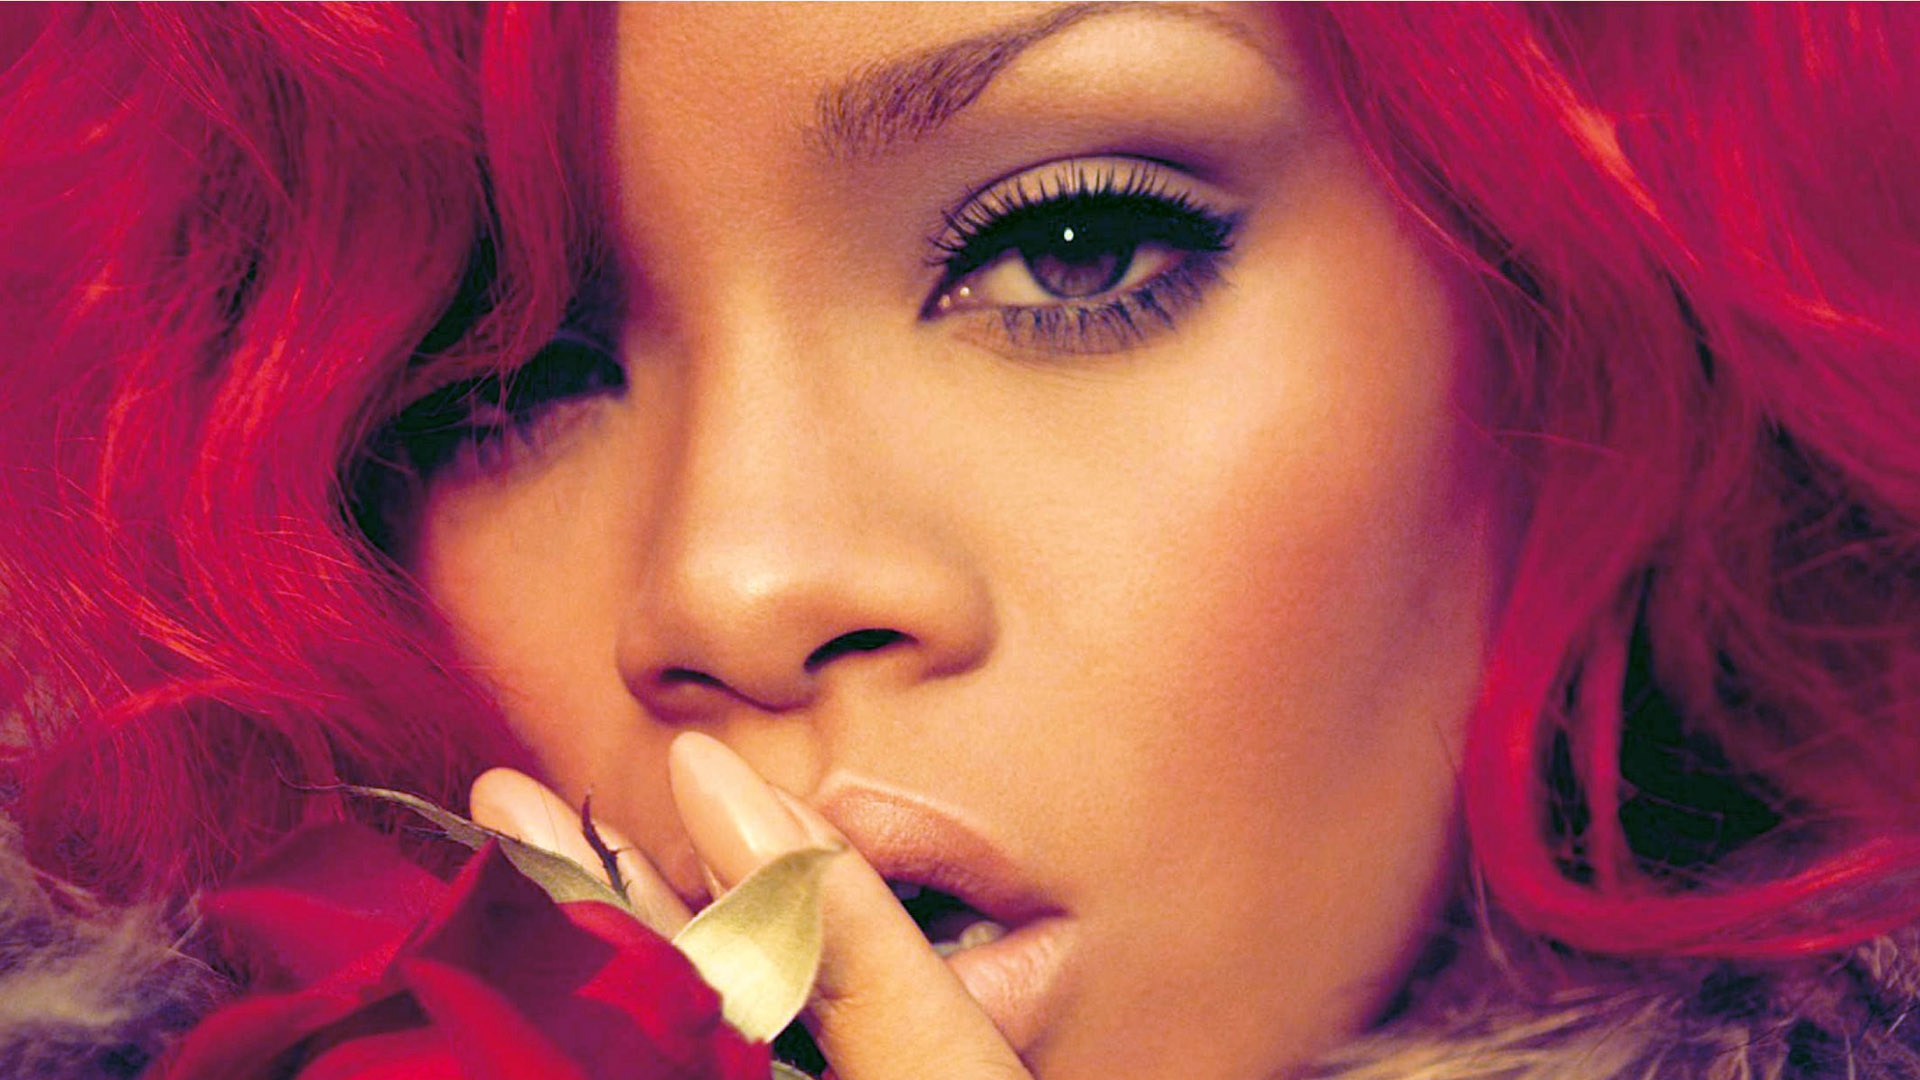 Rihanna Wallpaper Pictures Image